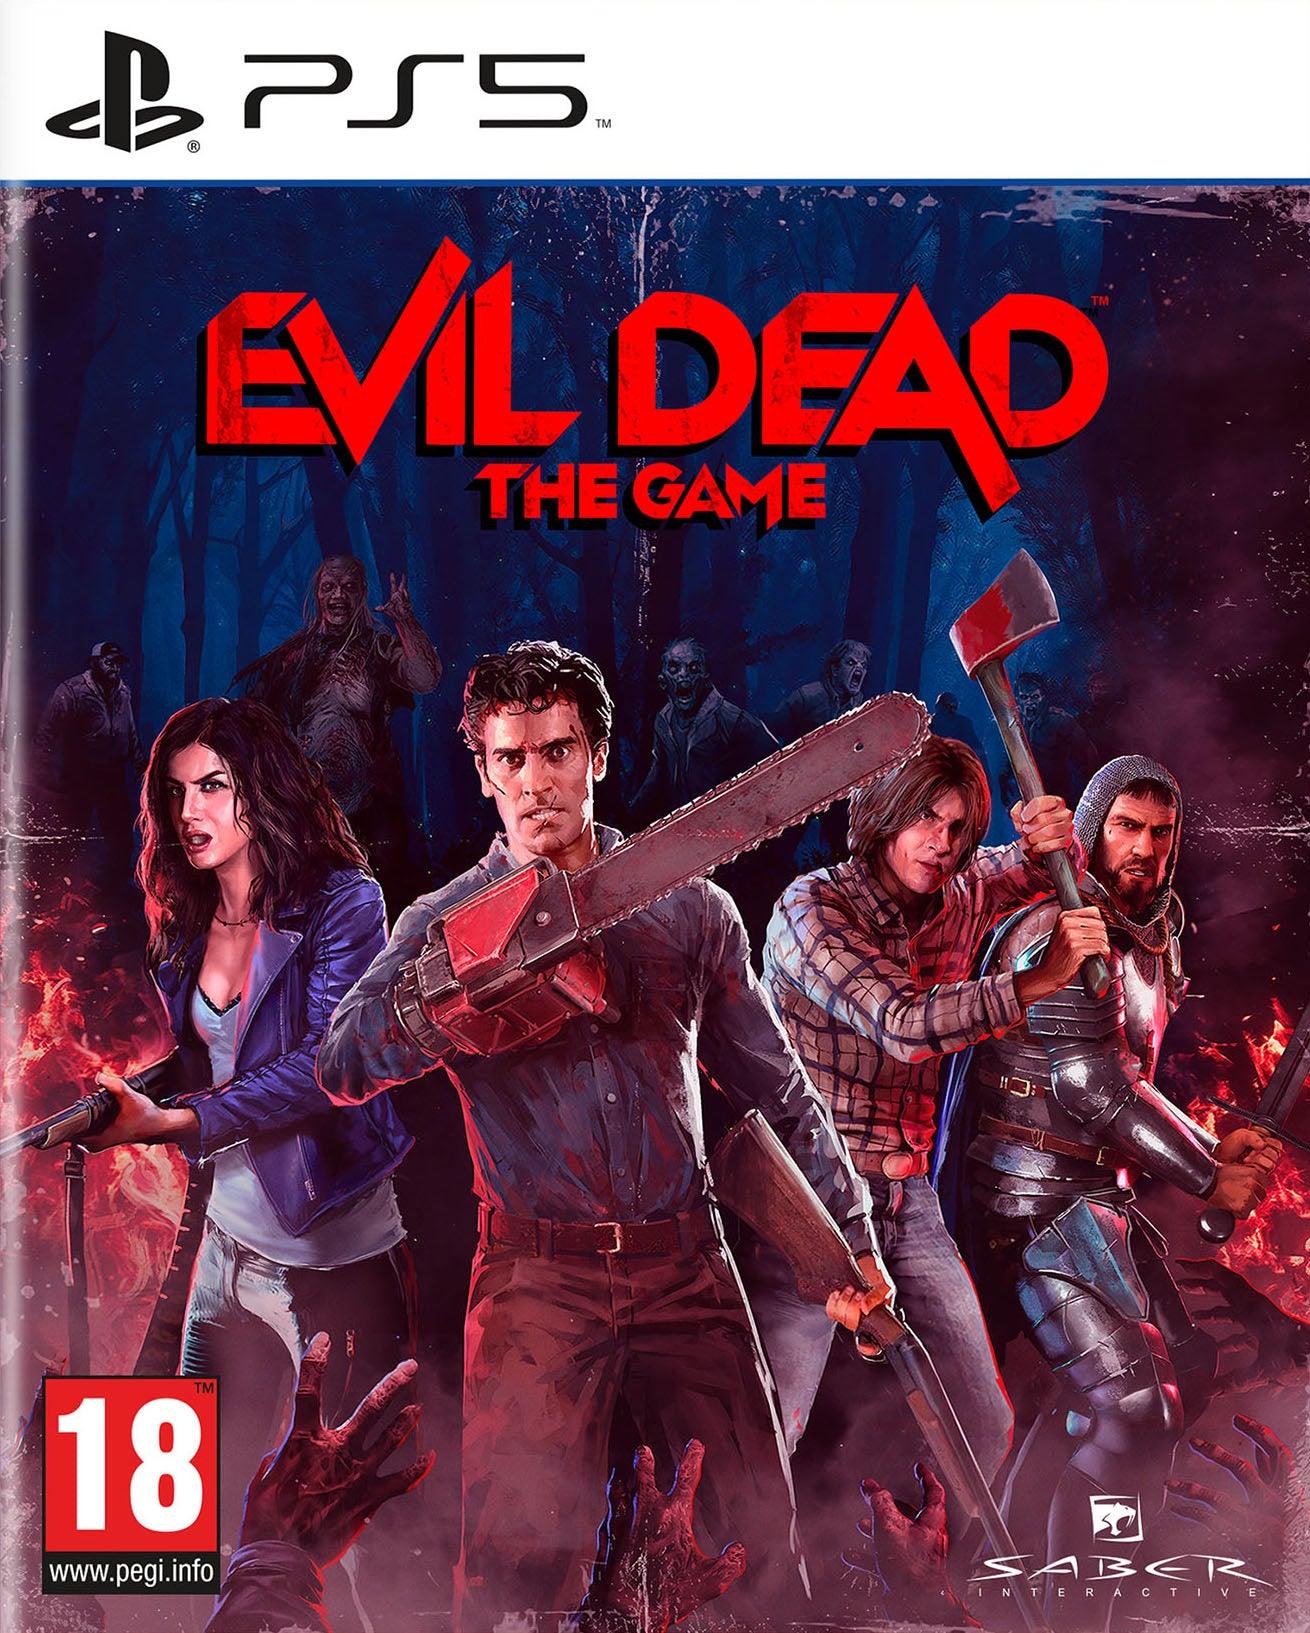 Evil Dead The Game - Want a New Gadget